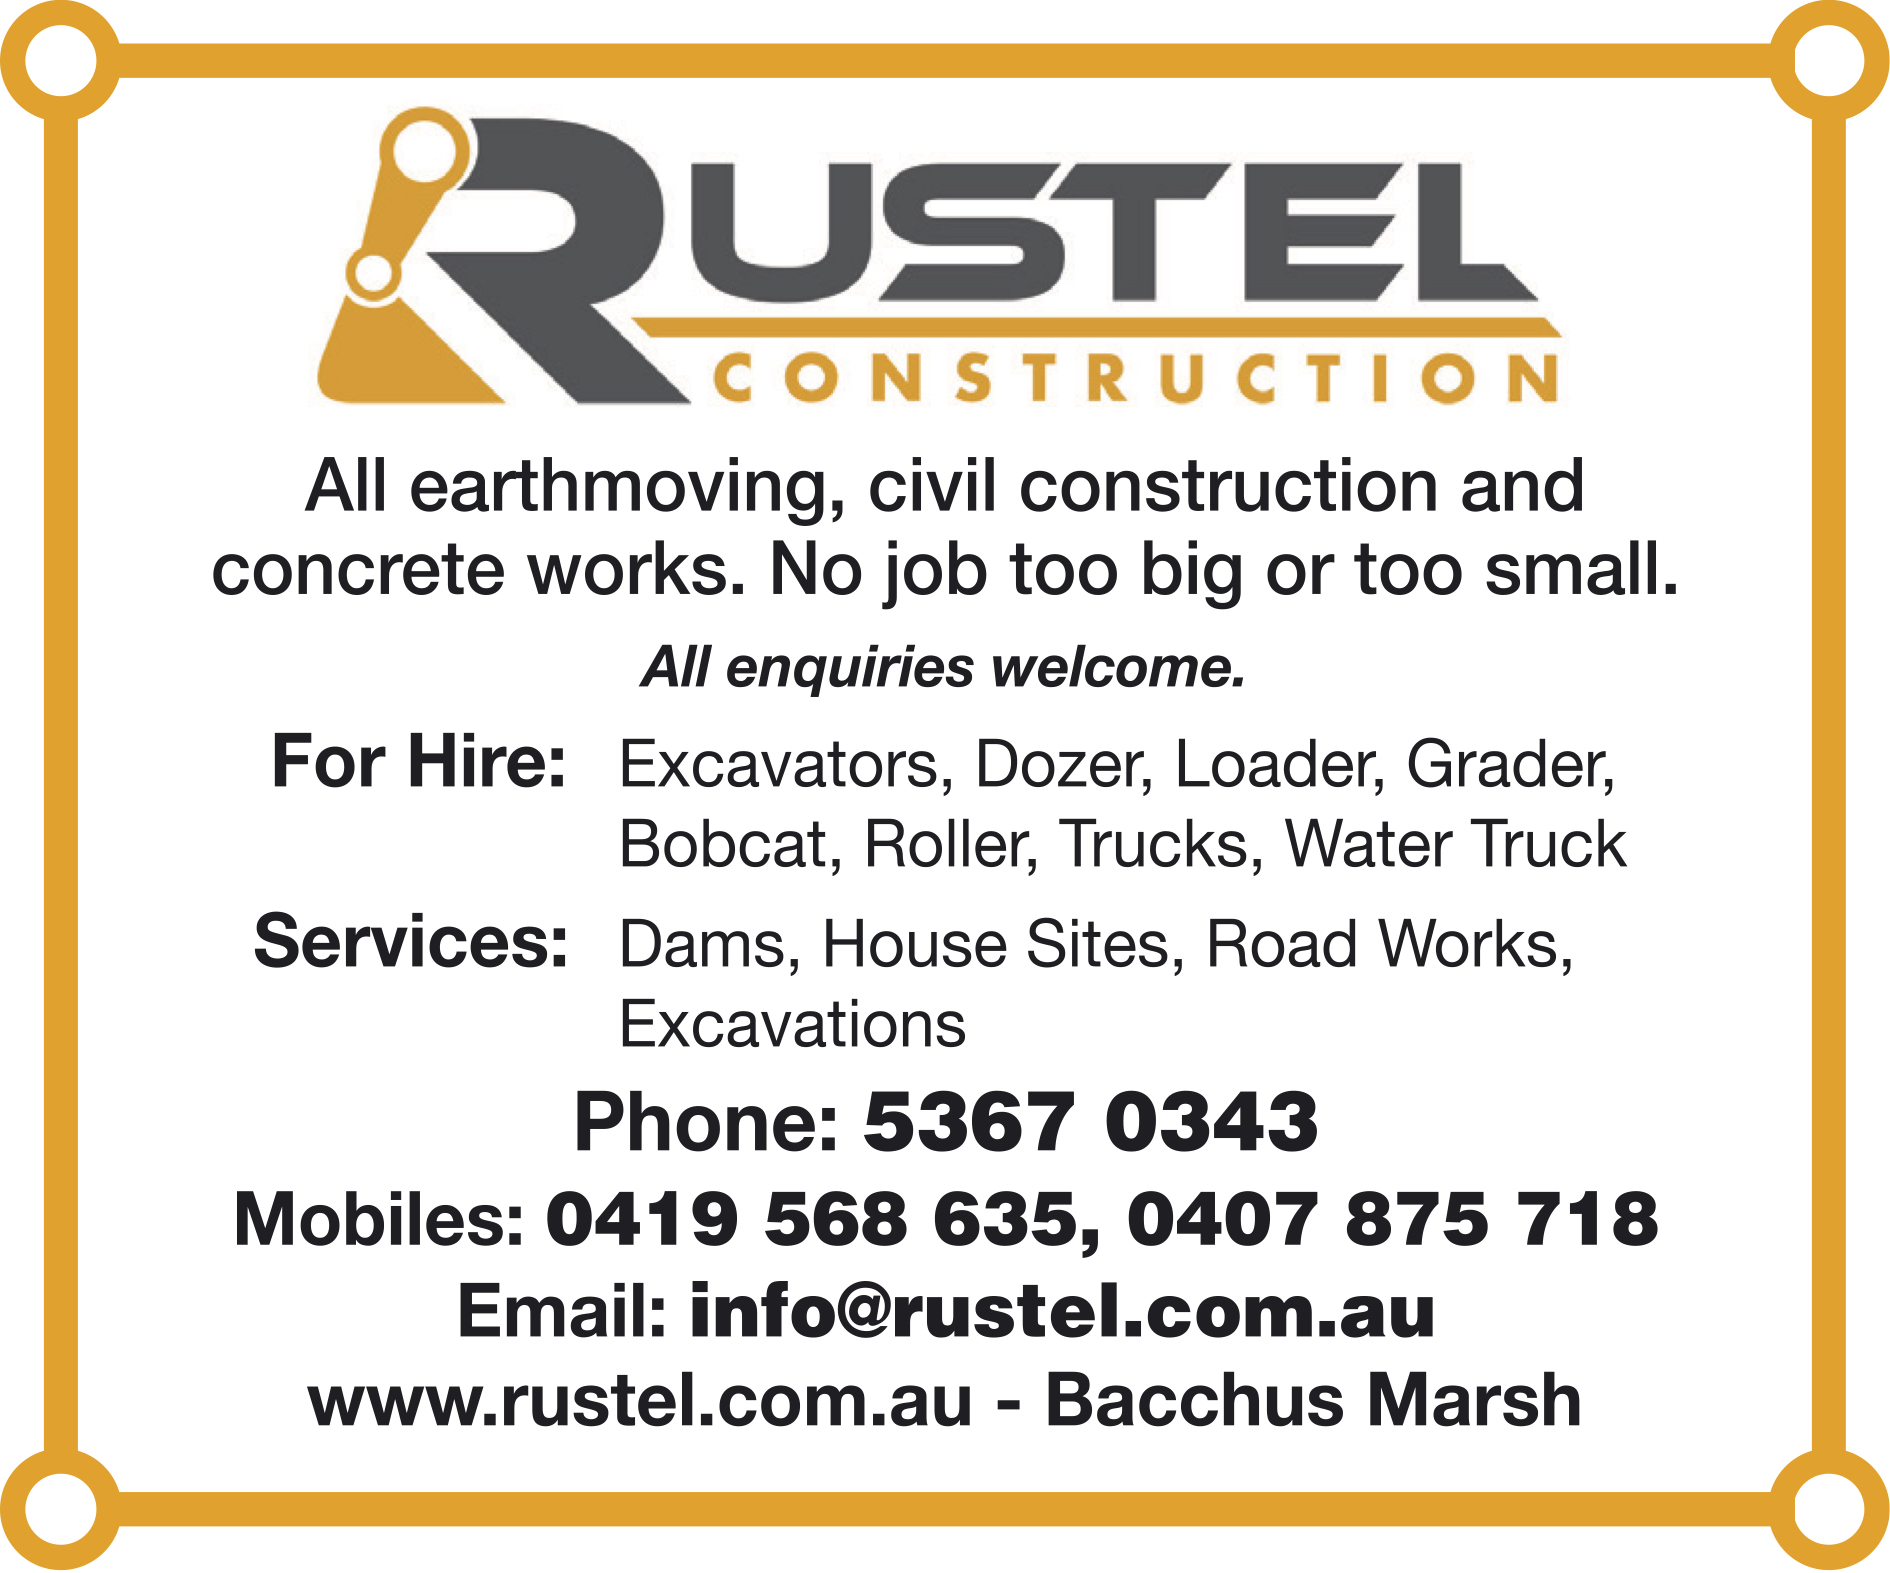 Rustel Construction - Excavating & Earth Moving Services